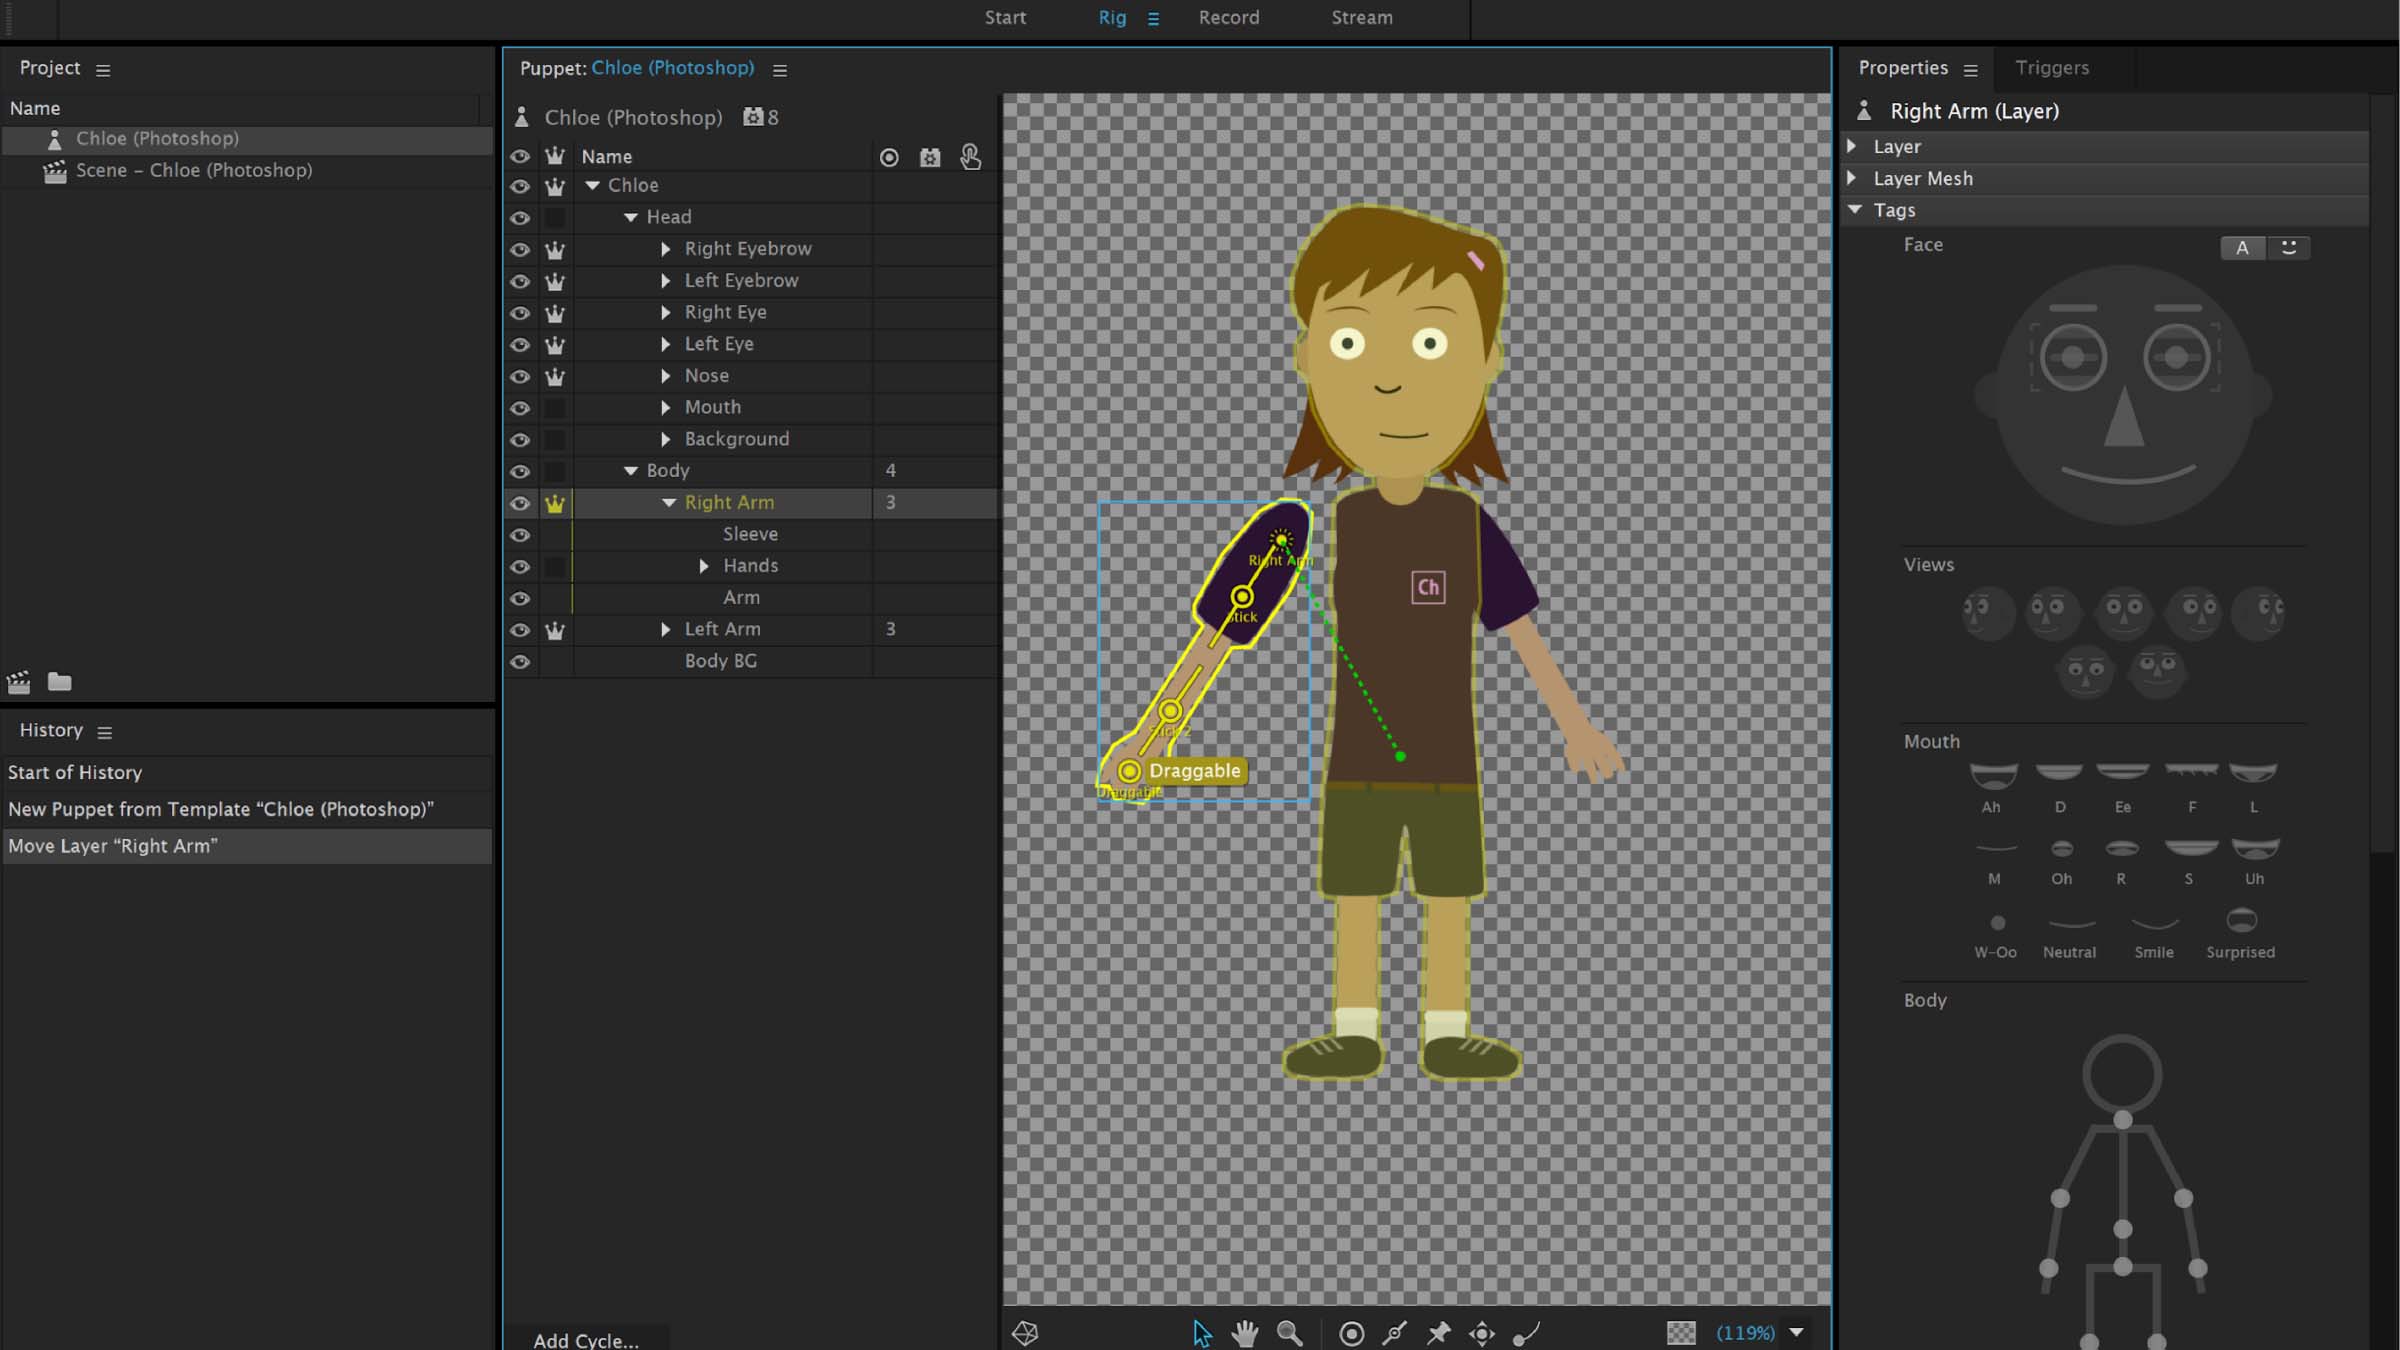 adobe character animator review